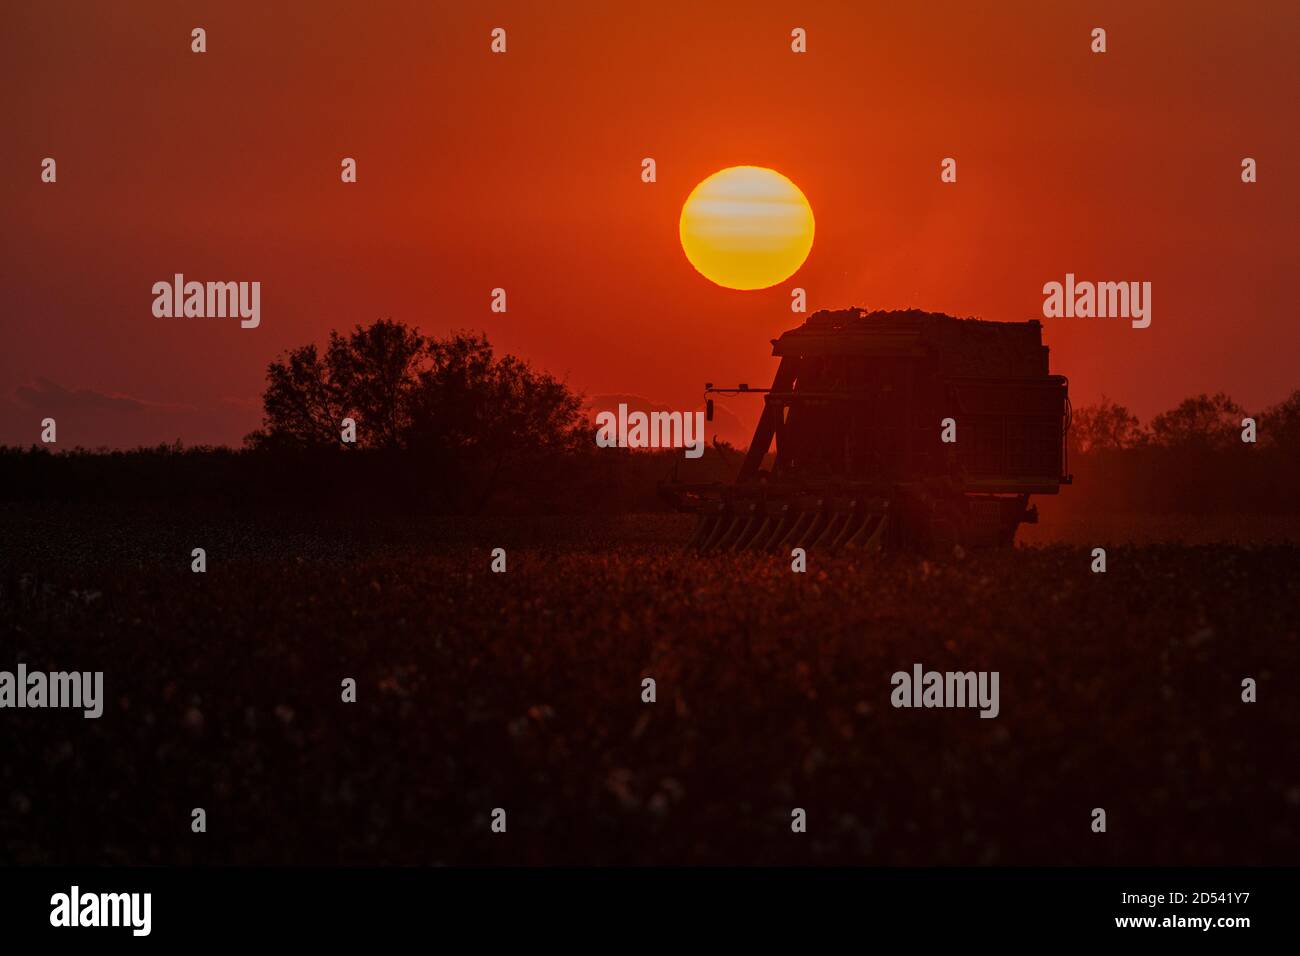 A speciality cotton picking harvester is silhouetted by the setting sun during the cotton harvest at the Schrimer Farms August 22, 2020 in Batesville, Texas. Stock Photo